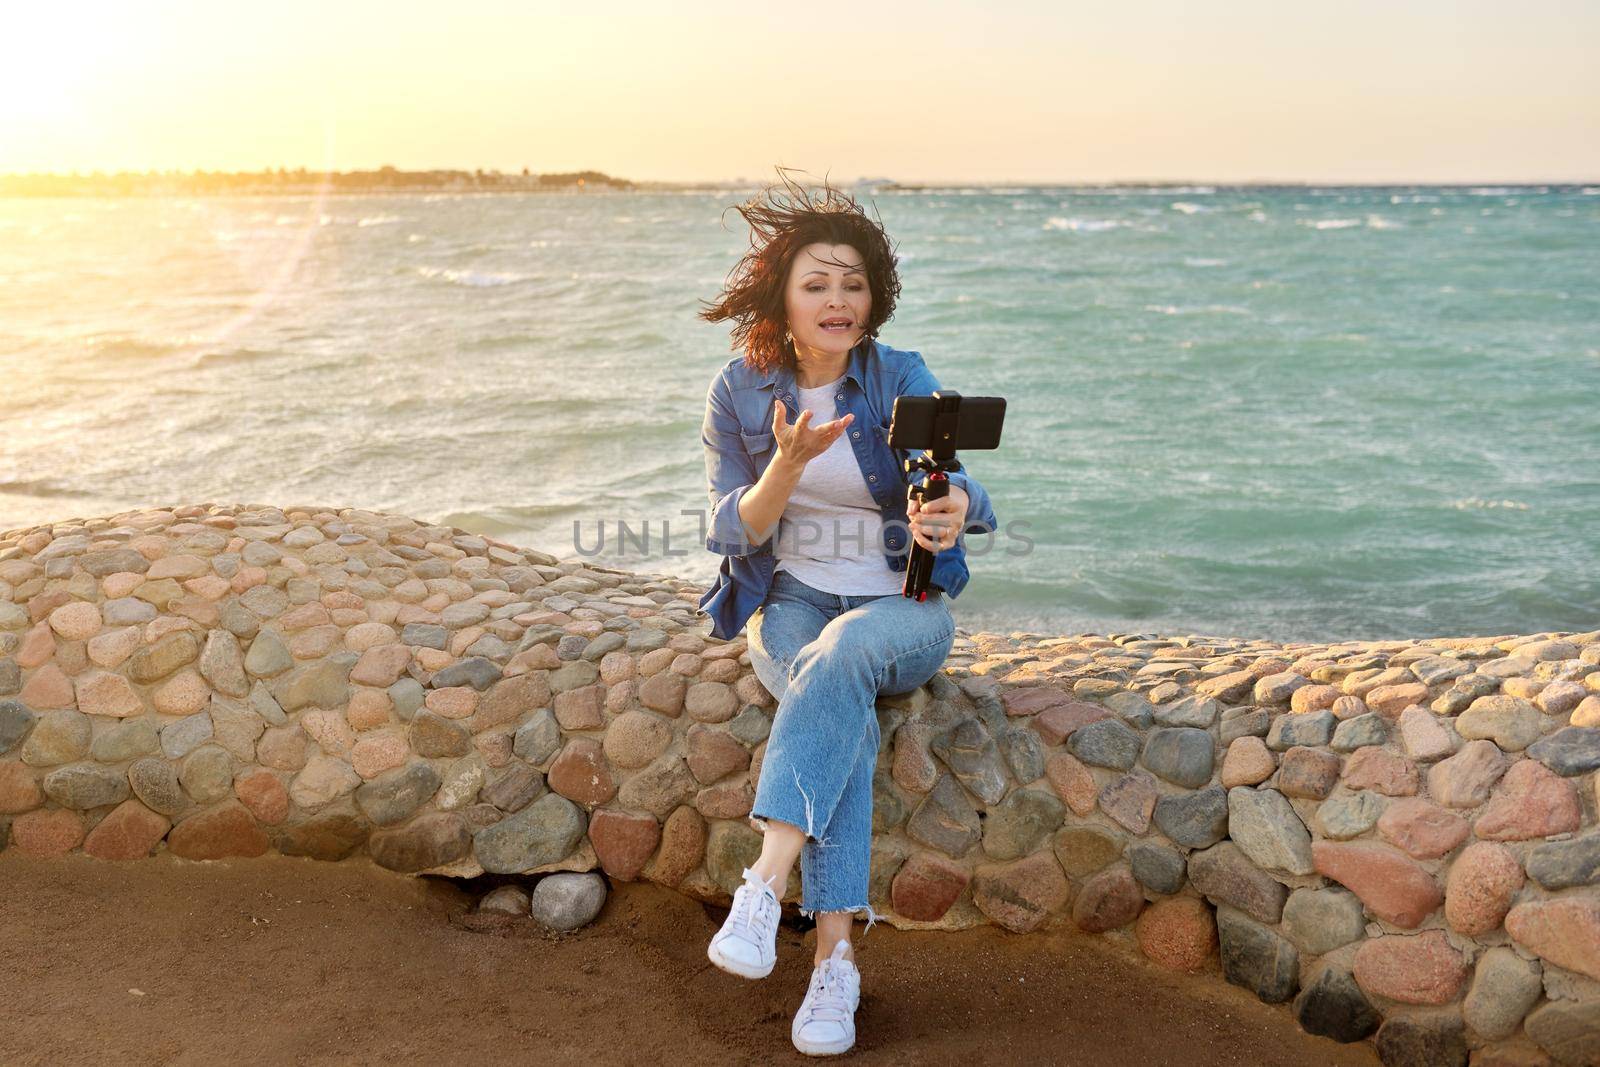 Technology, lifestyle, leisure and travel. Middle-aged female making online video call talking laughing, using smartphone, sunset seascape, sandy beach background, tropical autumn winter spring season